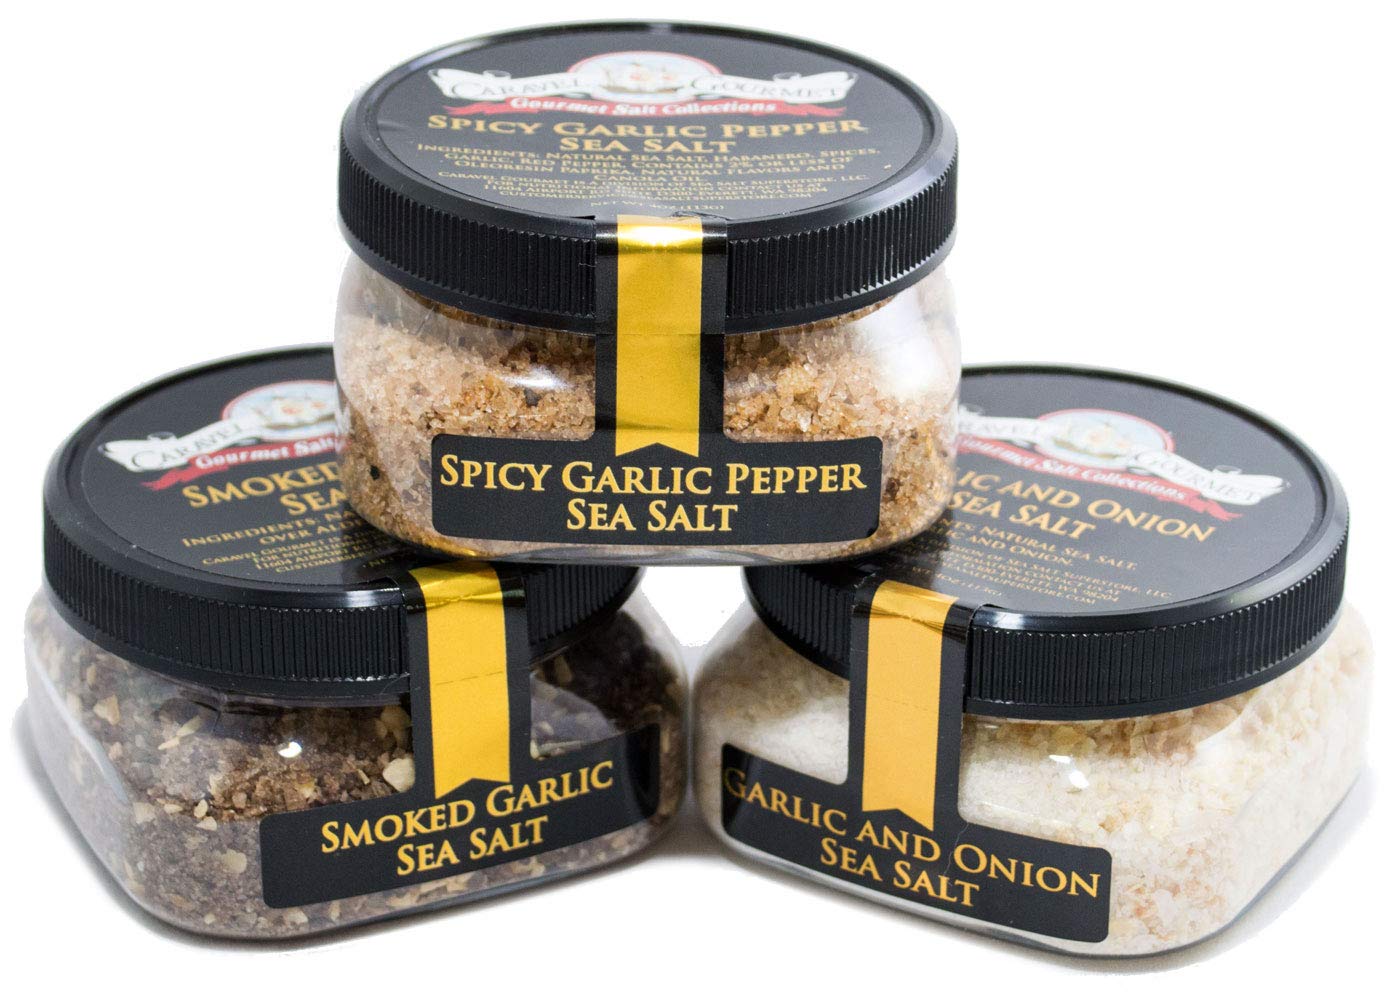 Garlic Lover's Sea Salt 3-Pack: Garlic & Onion, Smoked Garlic, and Spicy Garlic Pepper - Gluten-Free, No MSG, Non-GMO - A Great Gift for a Food...